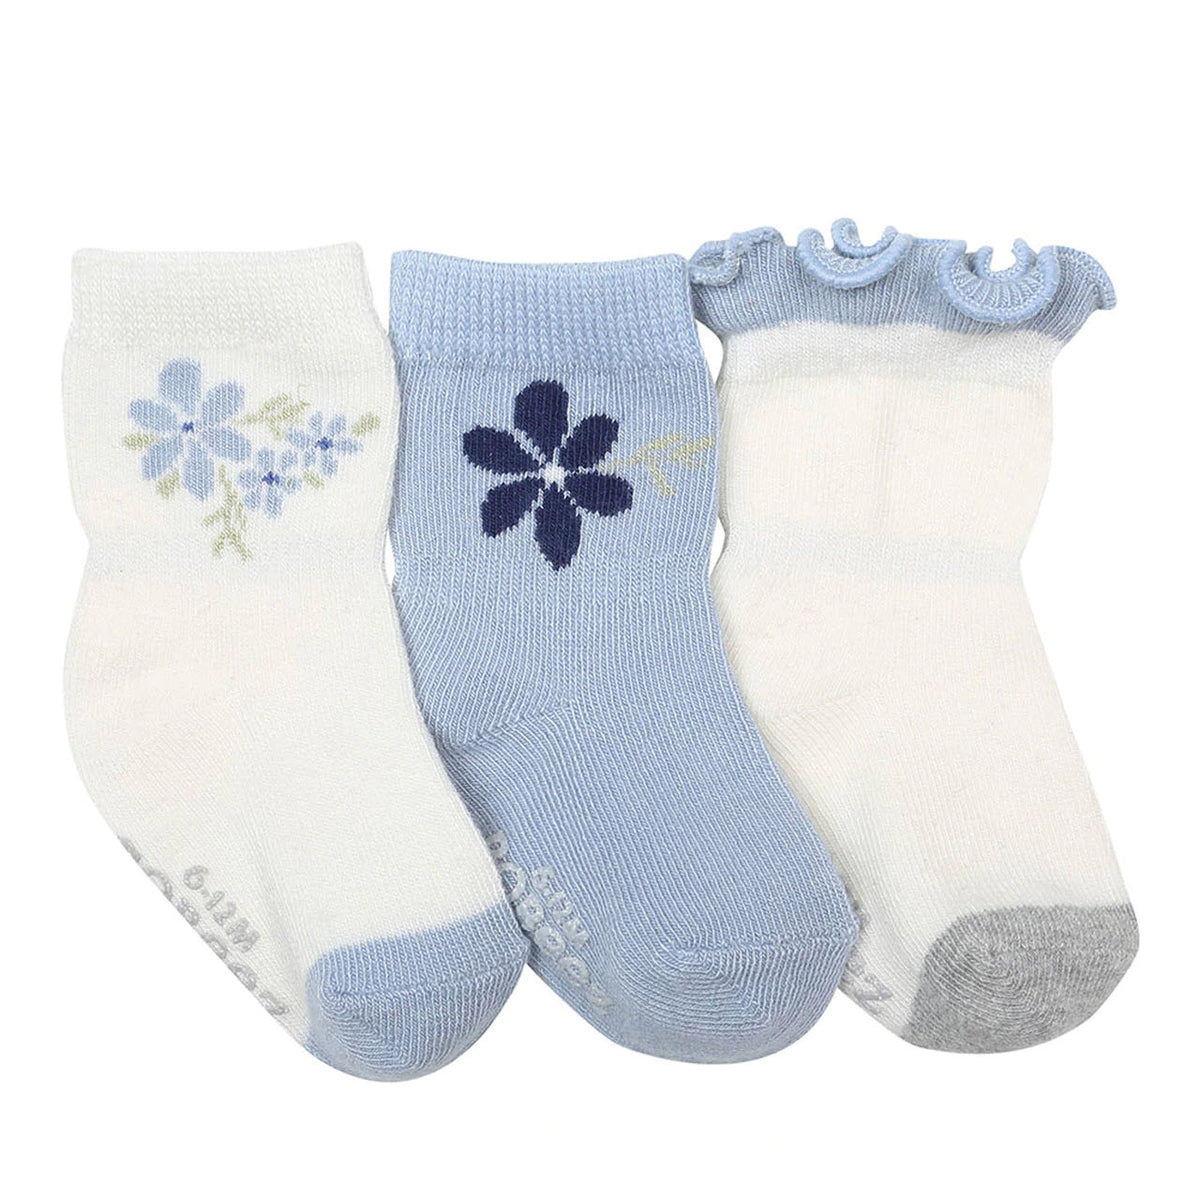 Three pairs of Robeez Pretty in Blue 3 Pack Socks with floral patterns and ruffle trim displayed on a white background.